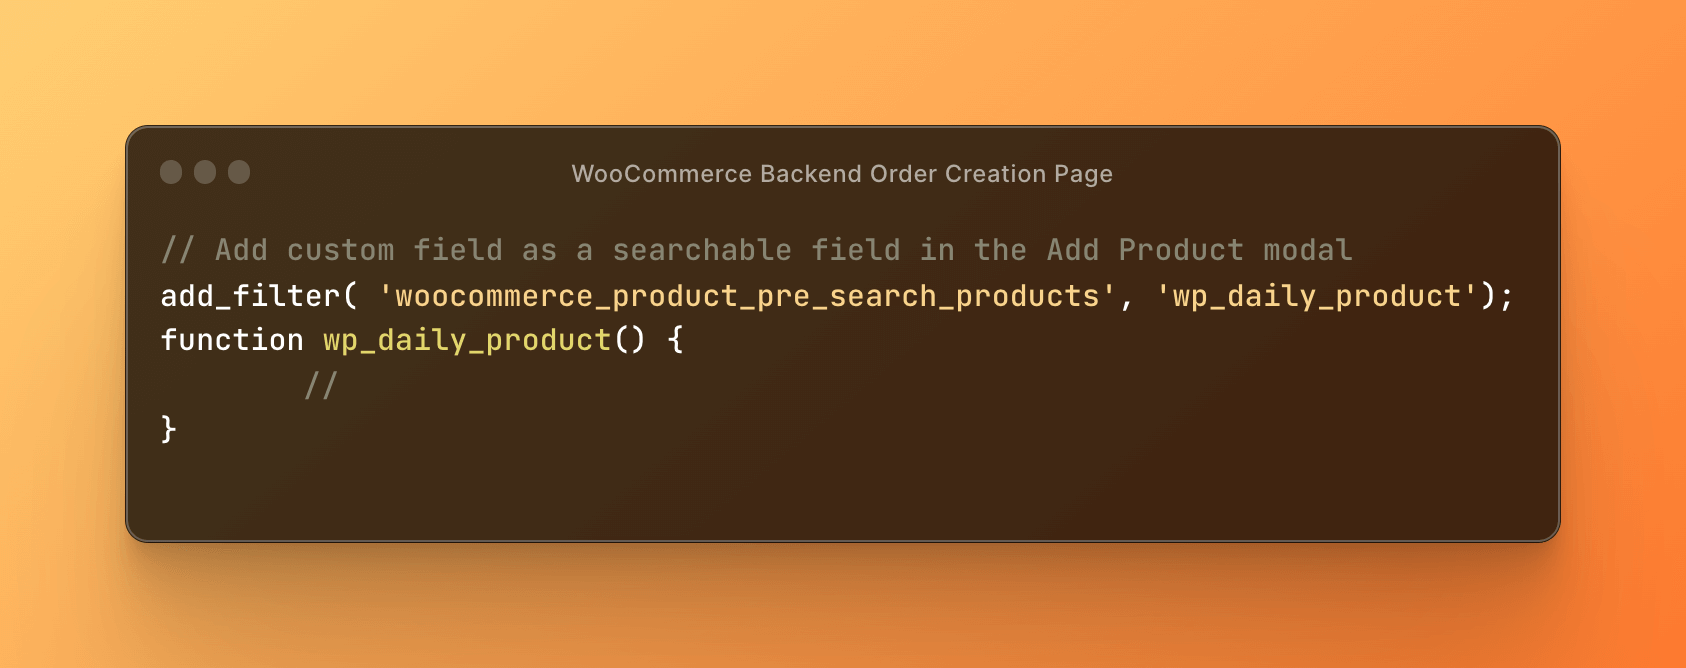 WooCommerce Backend Order Creation Page